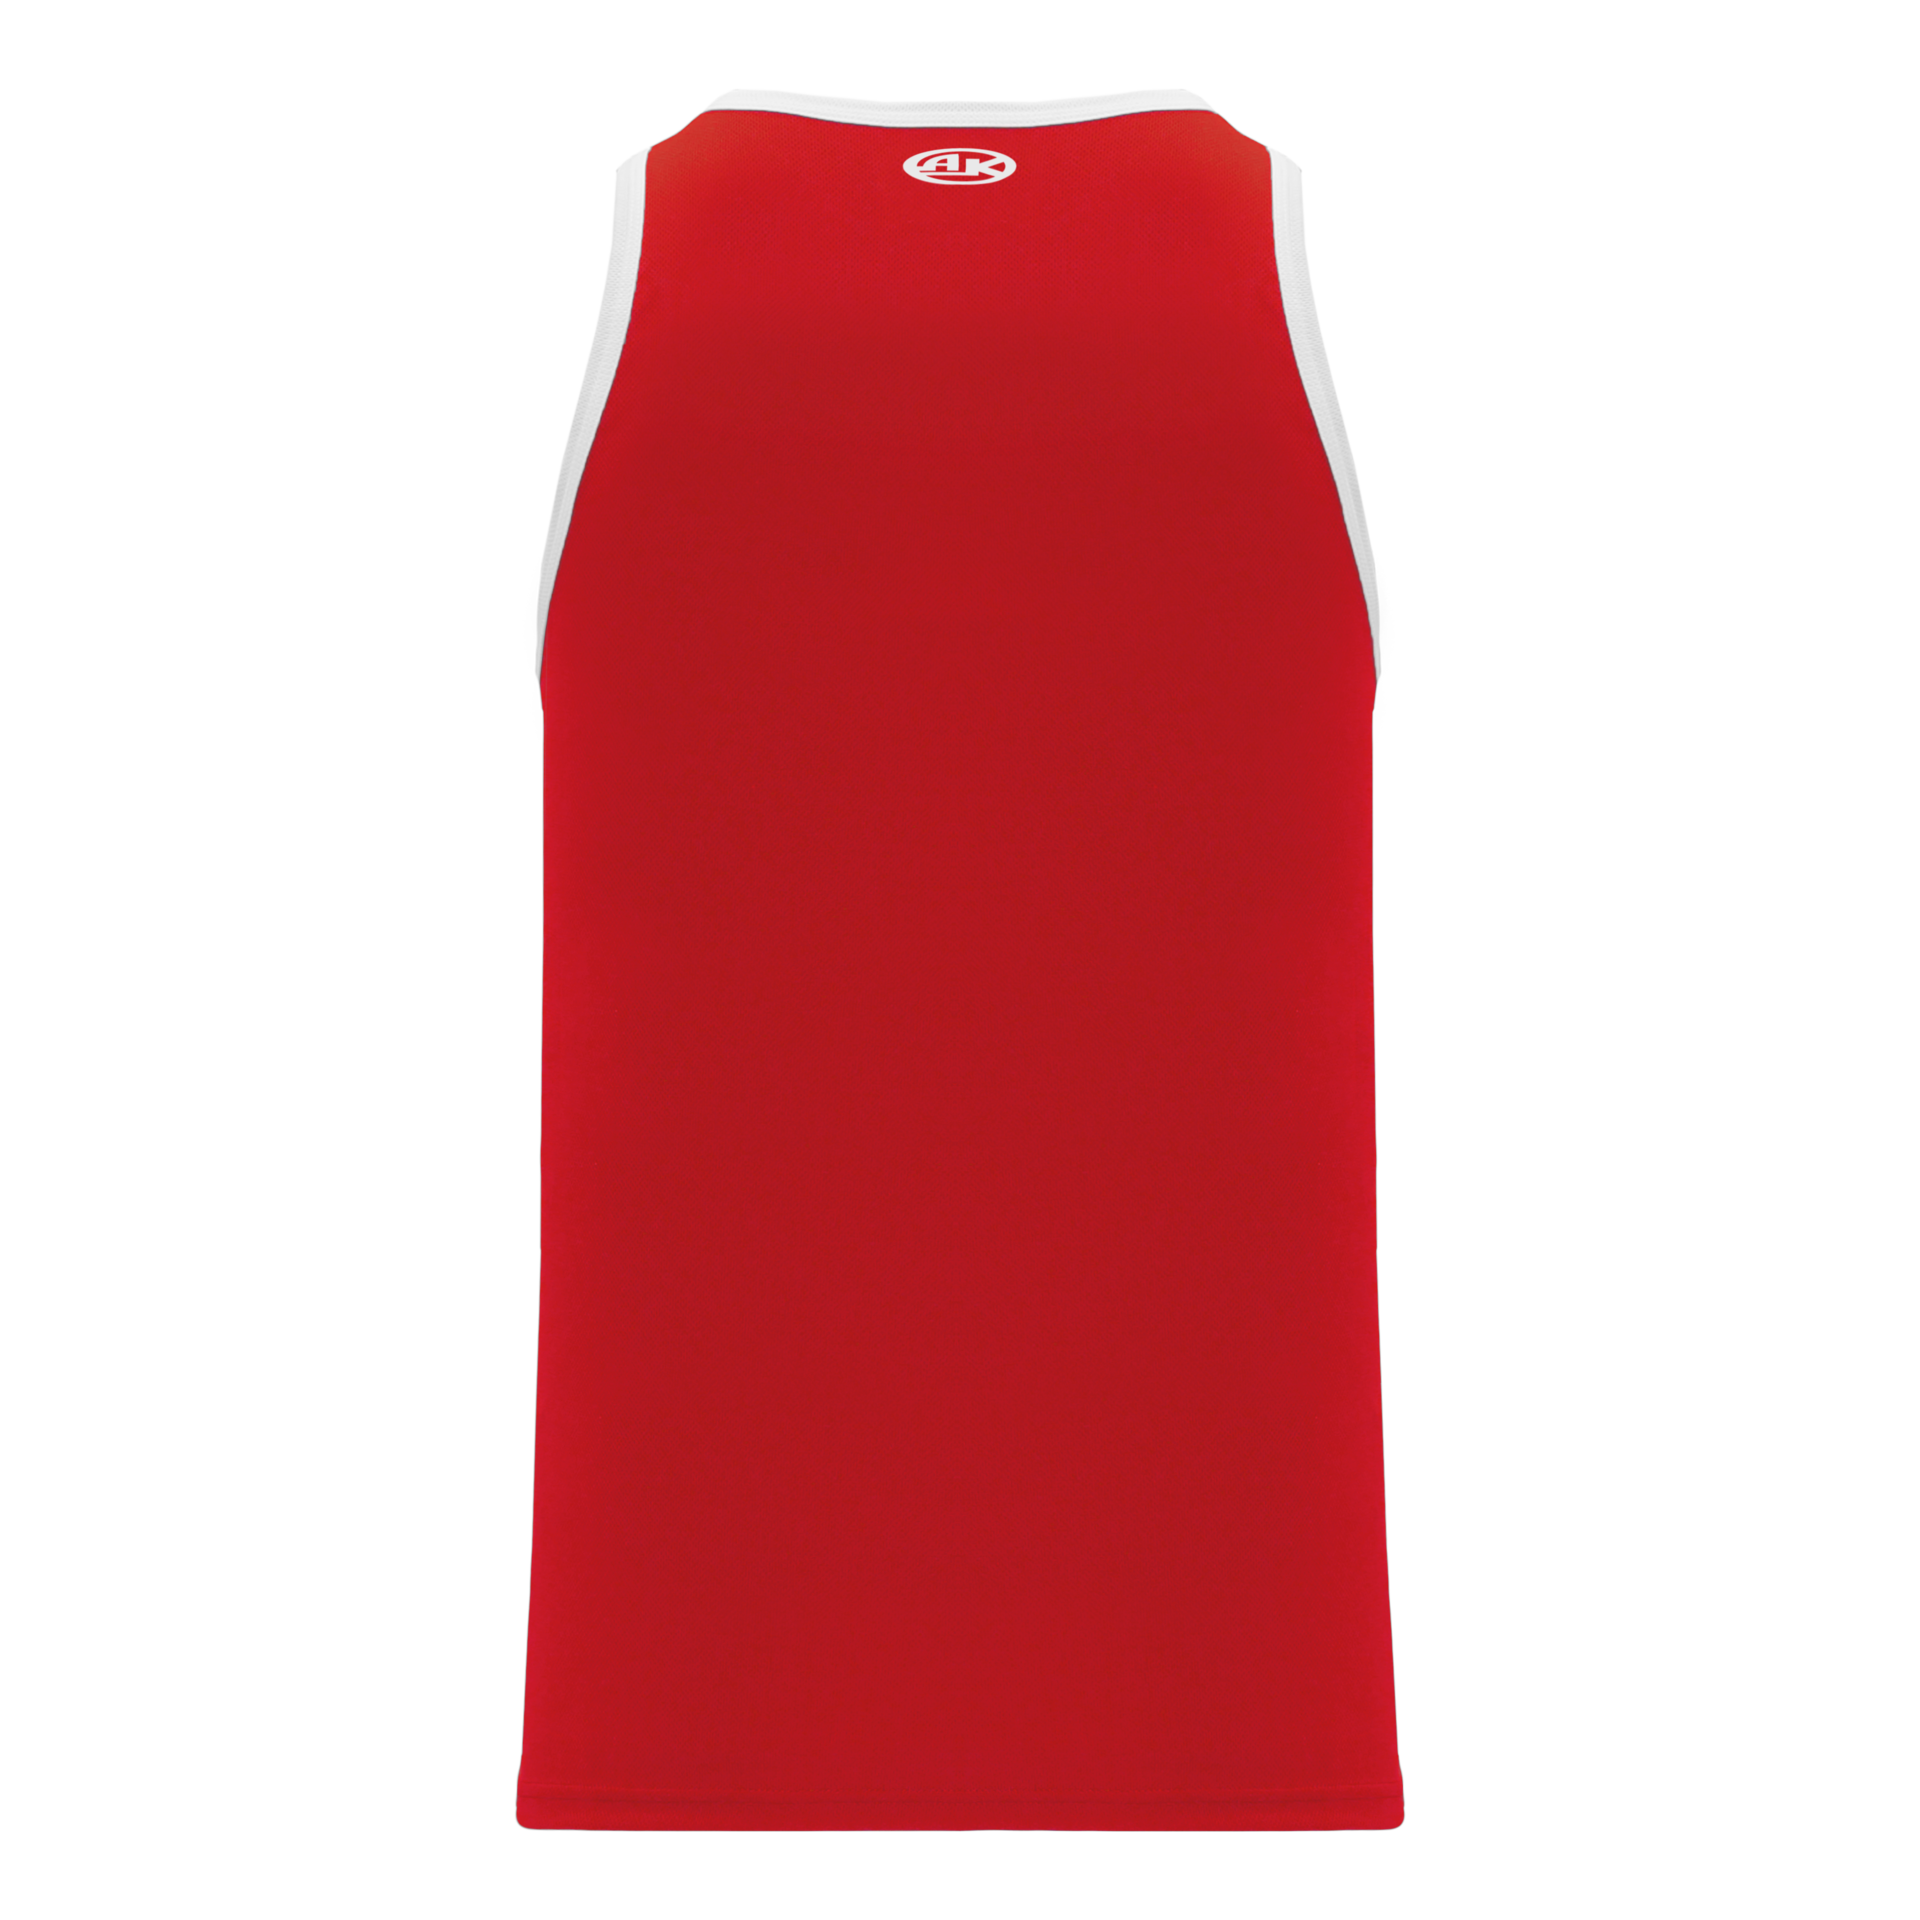 Youth Dual-Side Single Ply Basketball Jersey